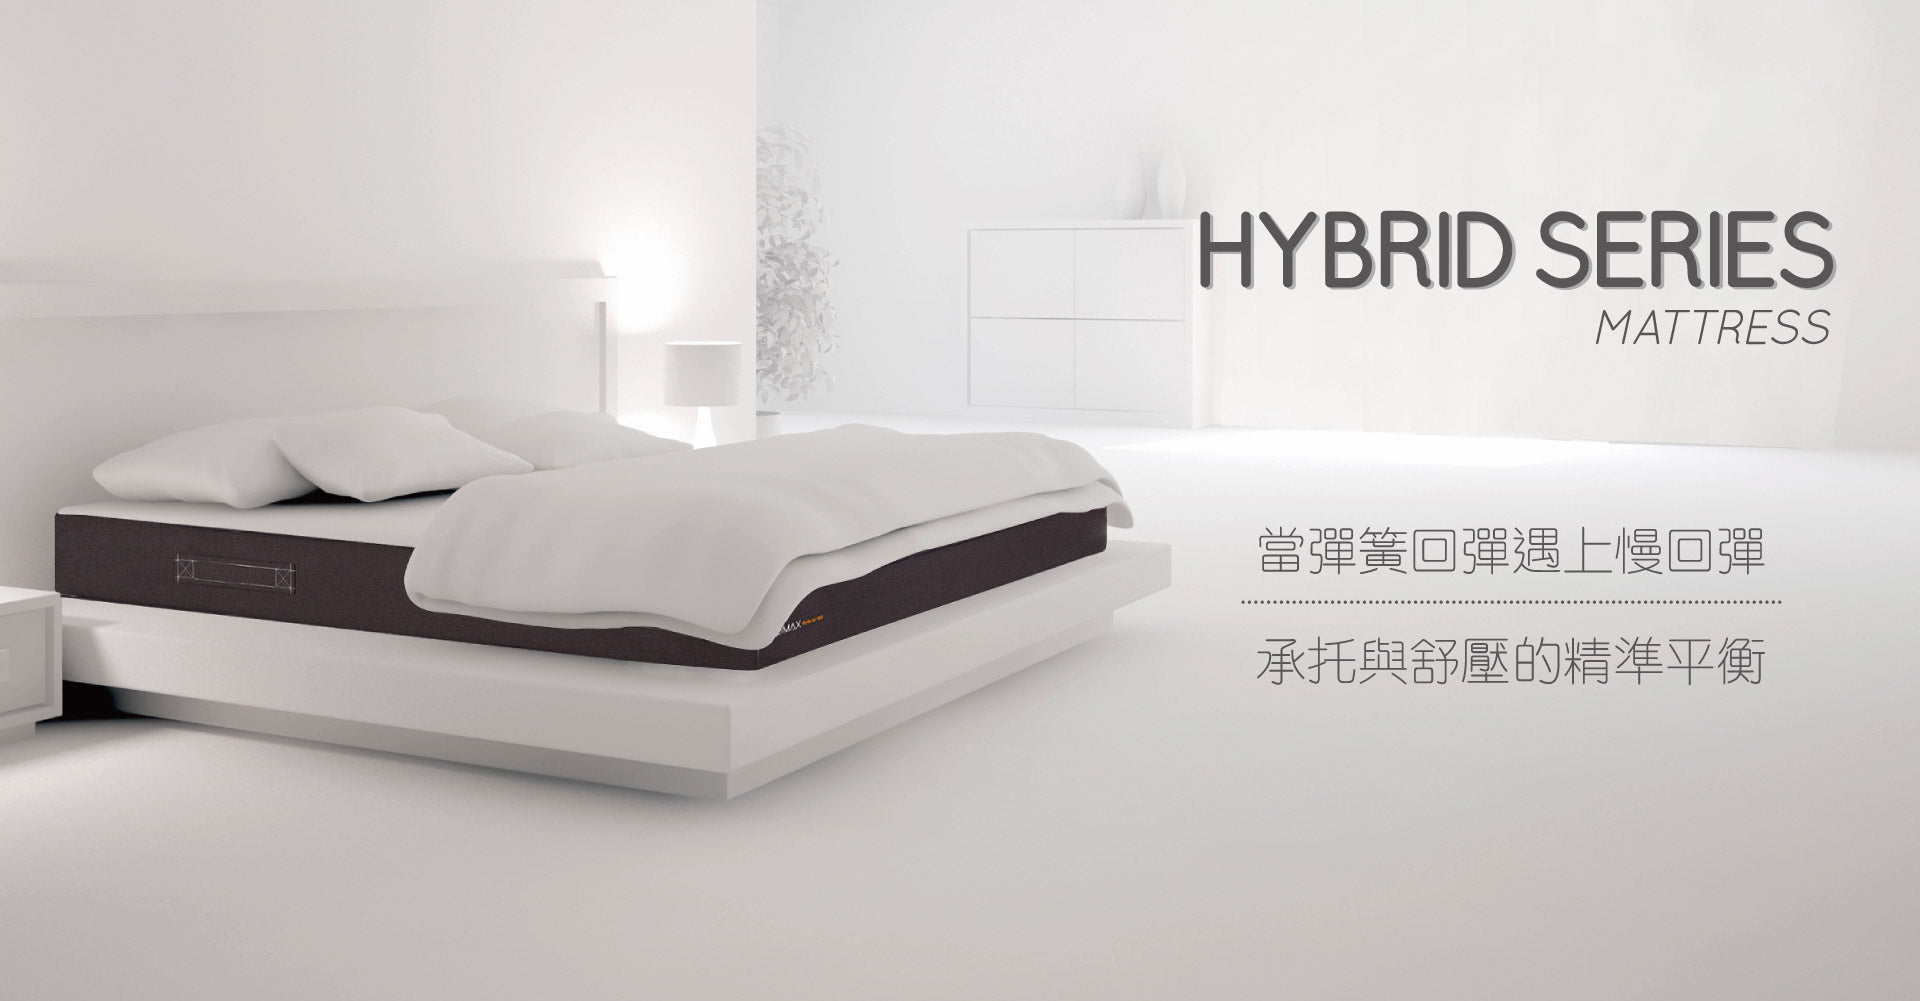 Hybrid 100 Pro Mattress - Tailor-made Size (above 48"W)